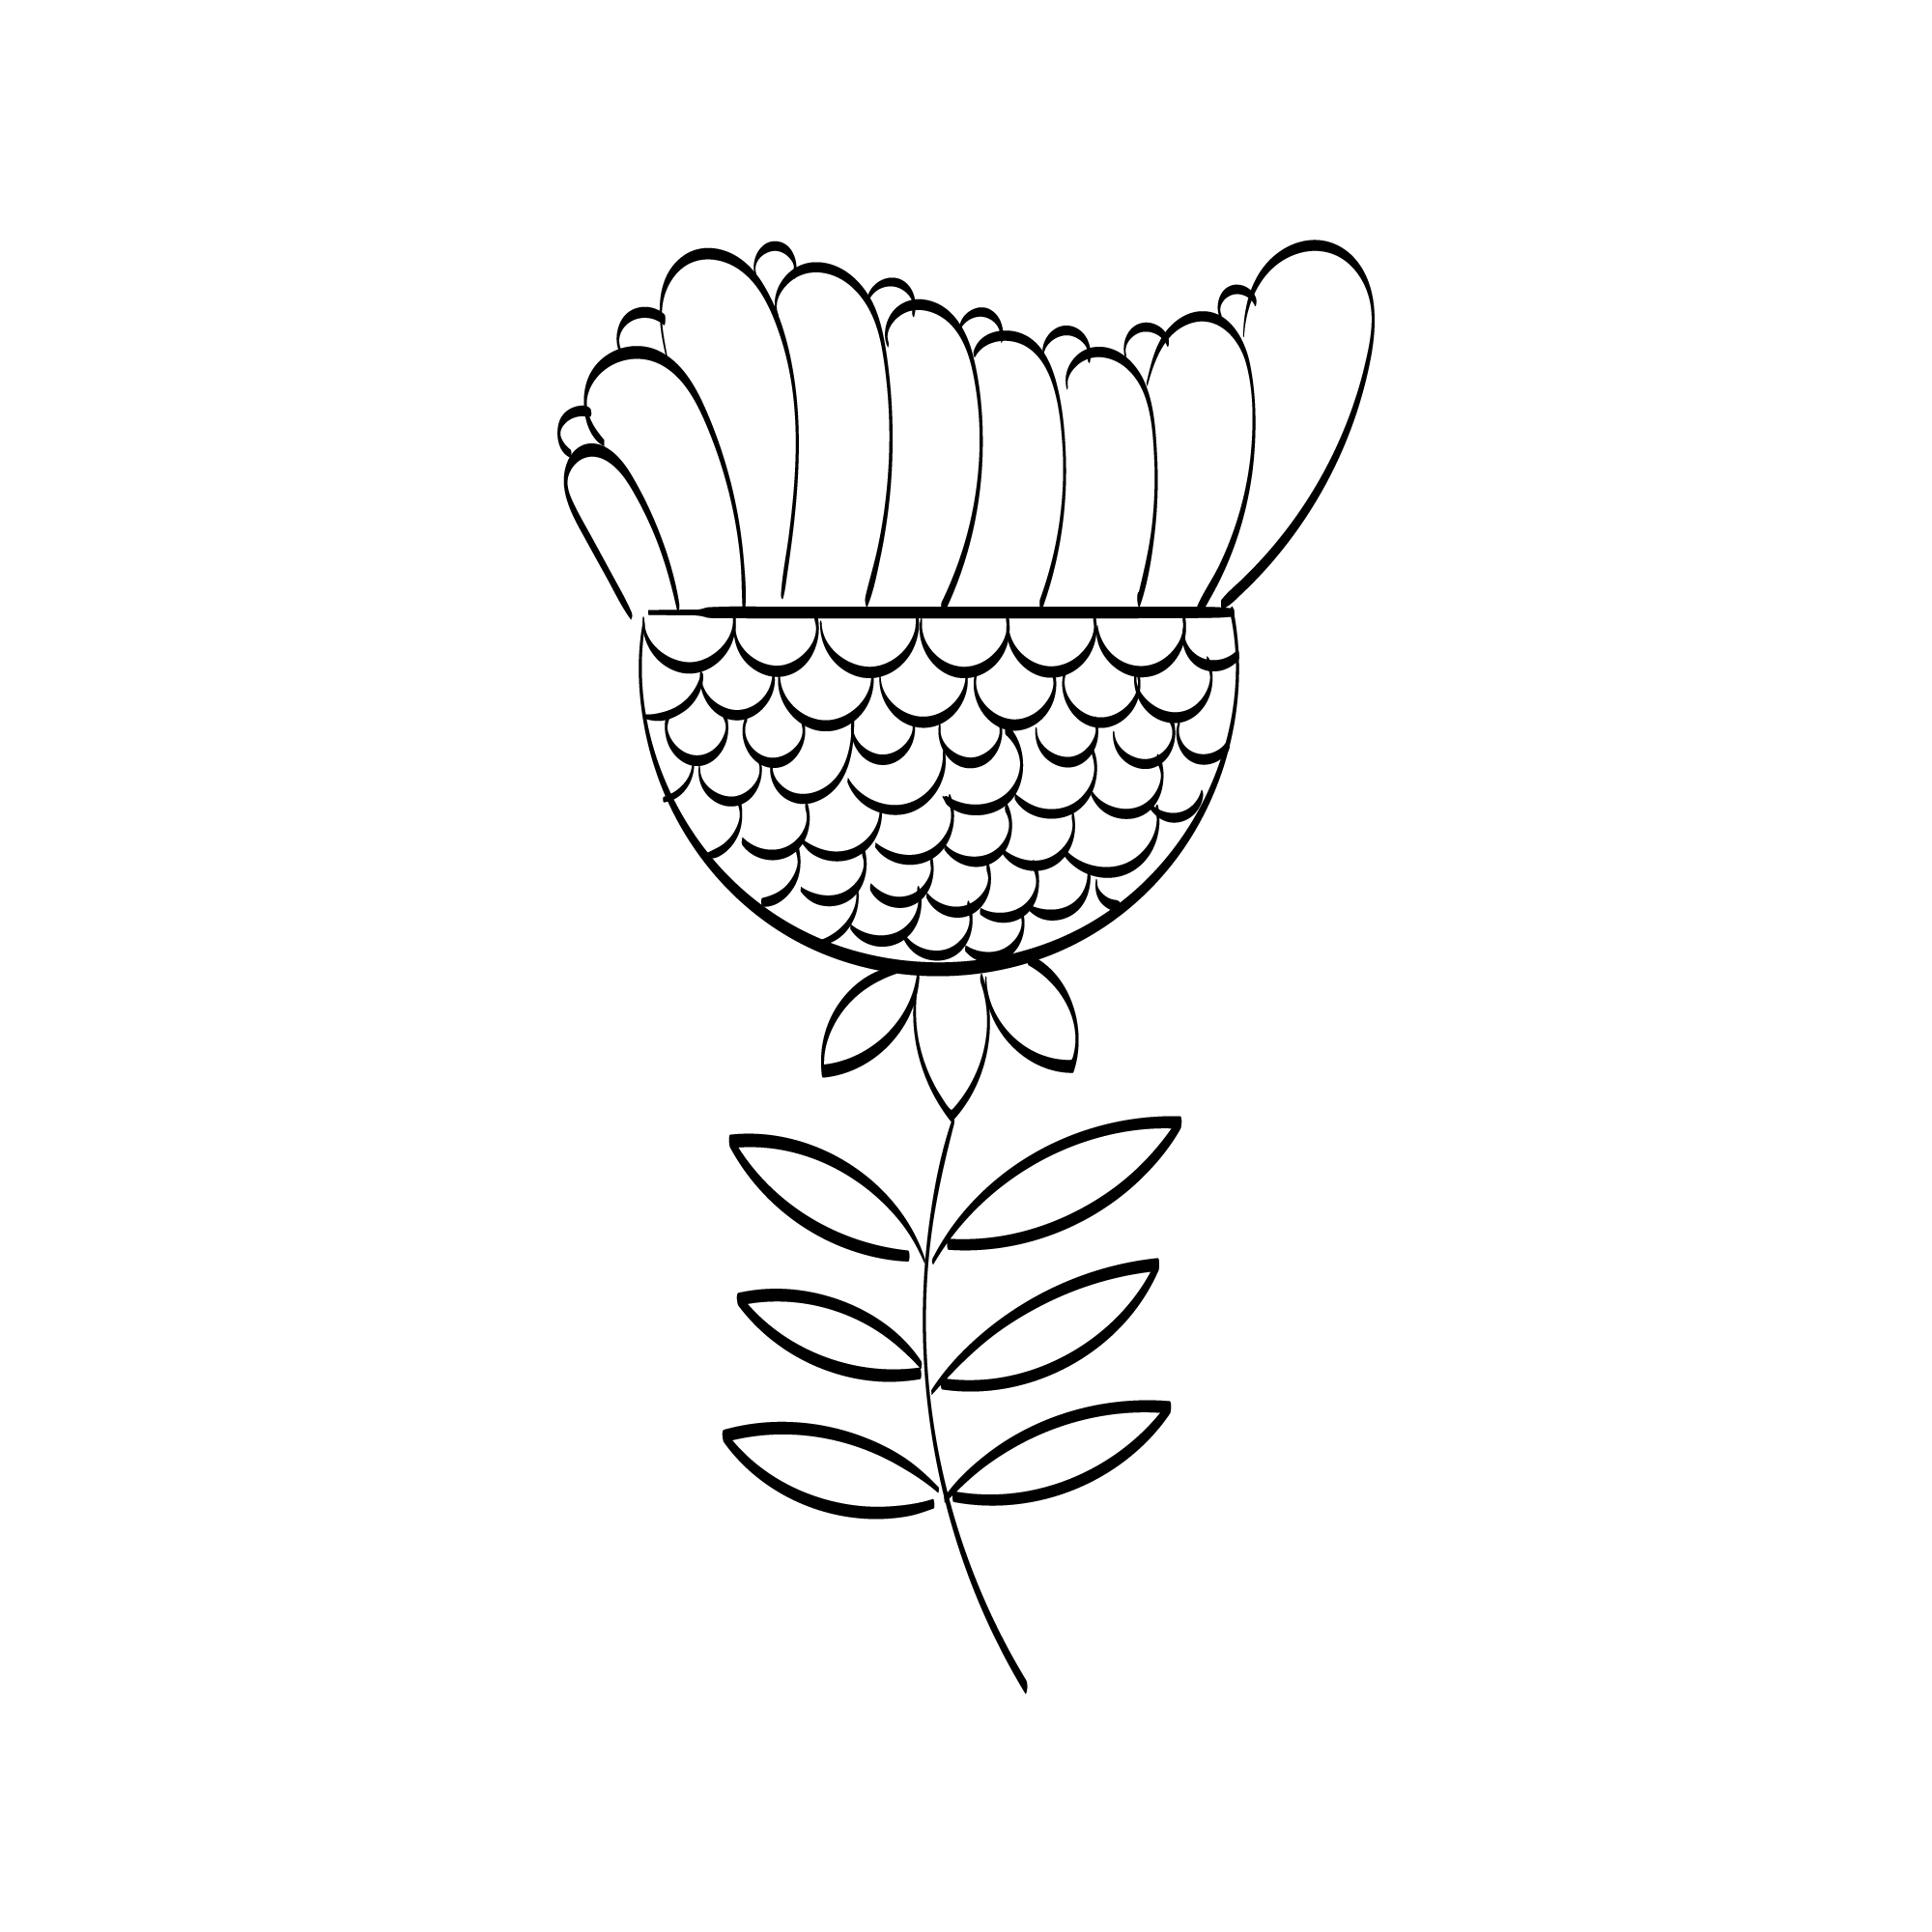 Flower Art Drawing with Line-art Preview image.